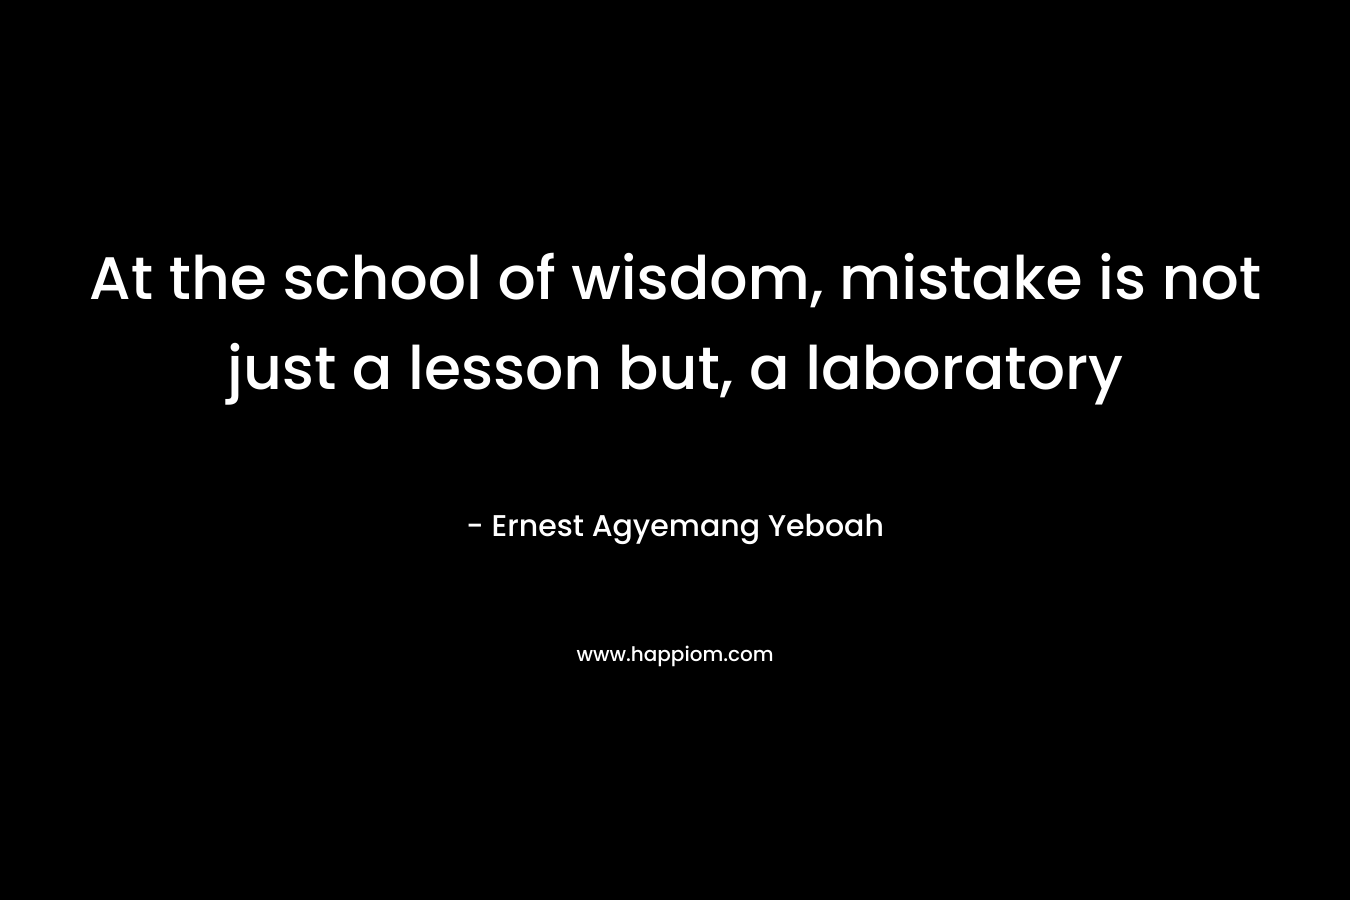 At the school of wisdom, mistake is not just a lesson but, a laboratory – Ernest Agyemang Yeboah